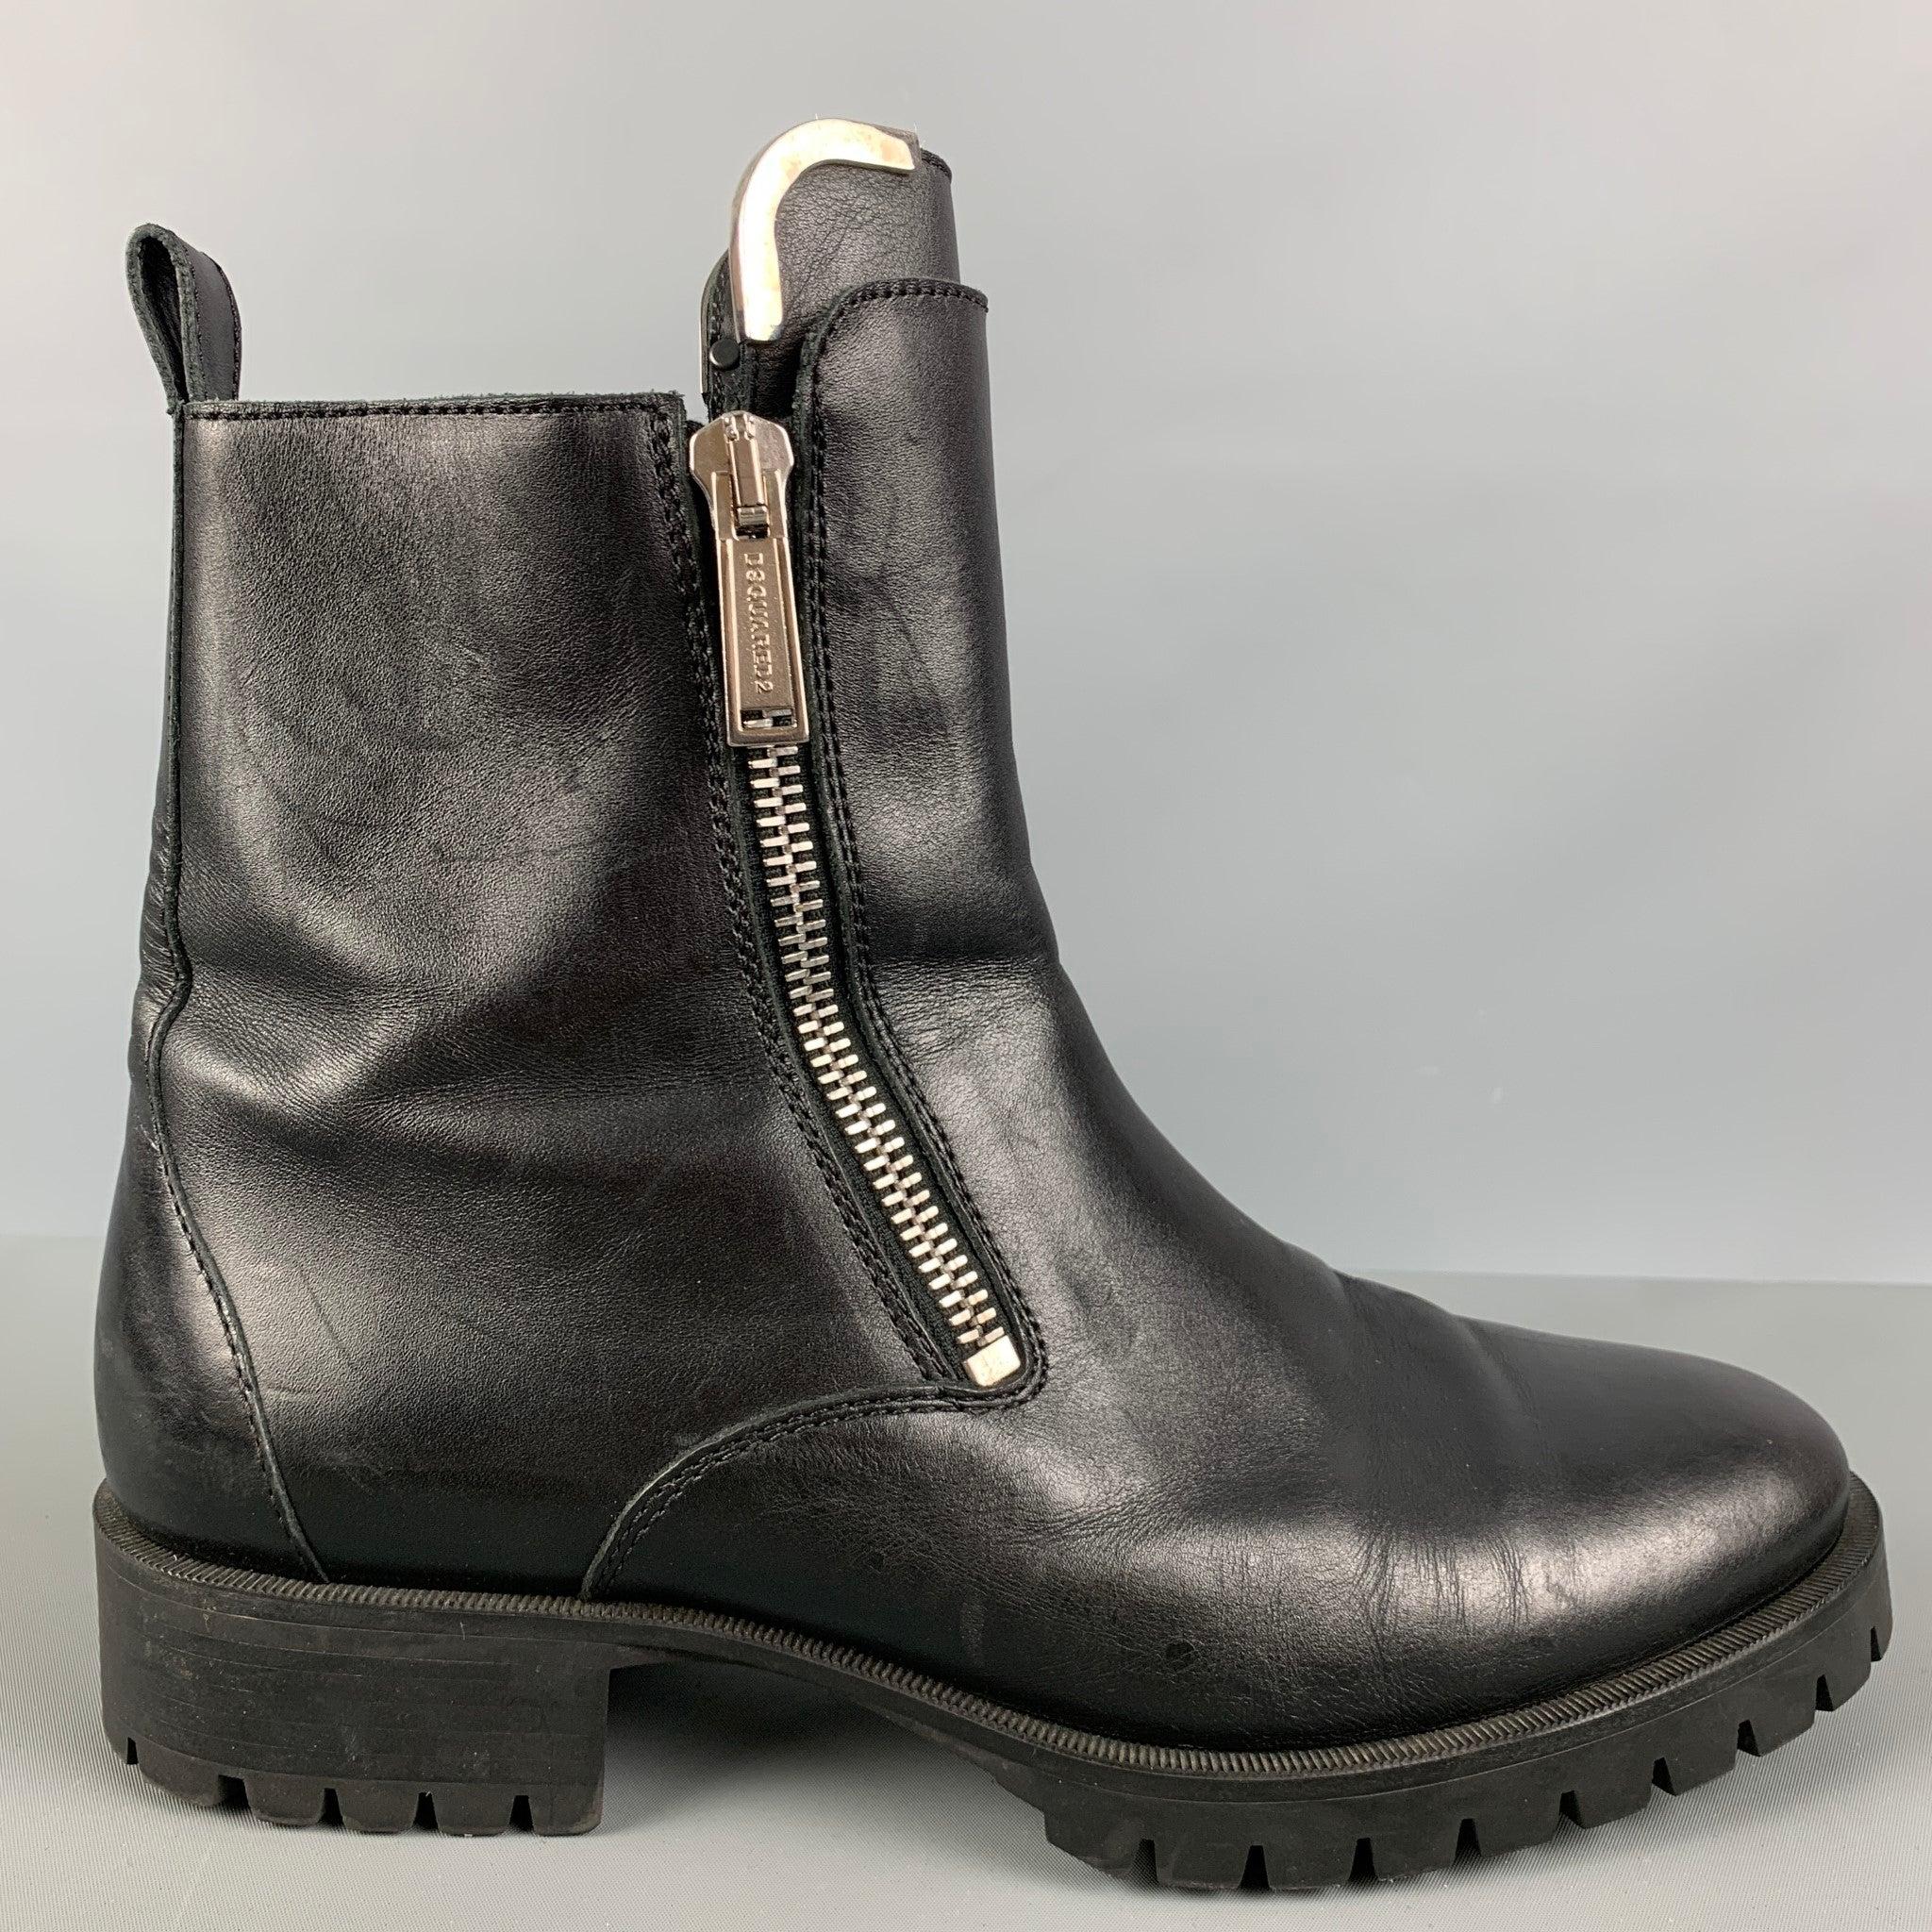 DSQUARED2 boots comes in a black leather featuring a hiking style, side zippers detail and combat boots style. Made in Italy.Very Good Pre-Owned Condition. 

Marked:   44 

Measurements: 
  Length: 12 inches Width: 4.5 inches Height: 7 inches  
  
 